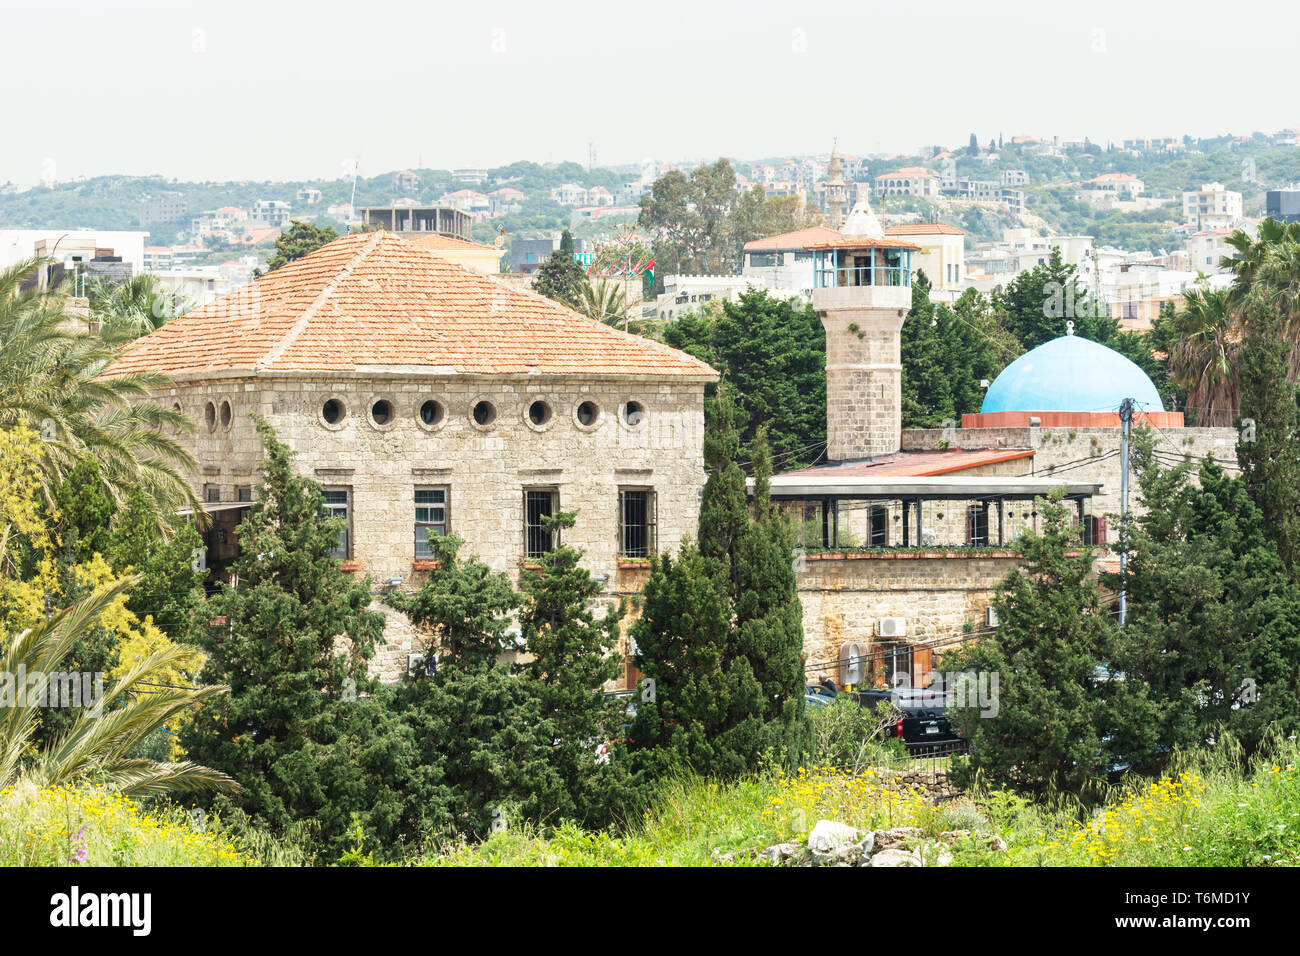 Sultan Abdul Majid mosque and an old house built in traditional Lebanese architecture, Byblos, Lebanon Stock Photo